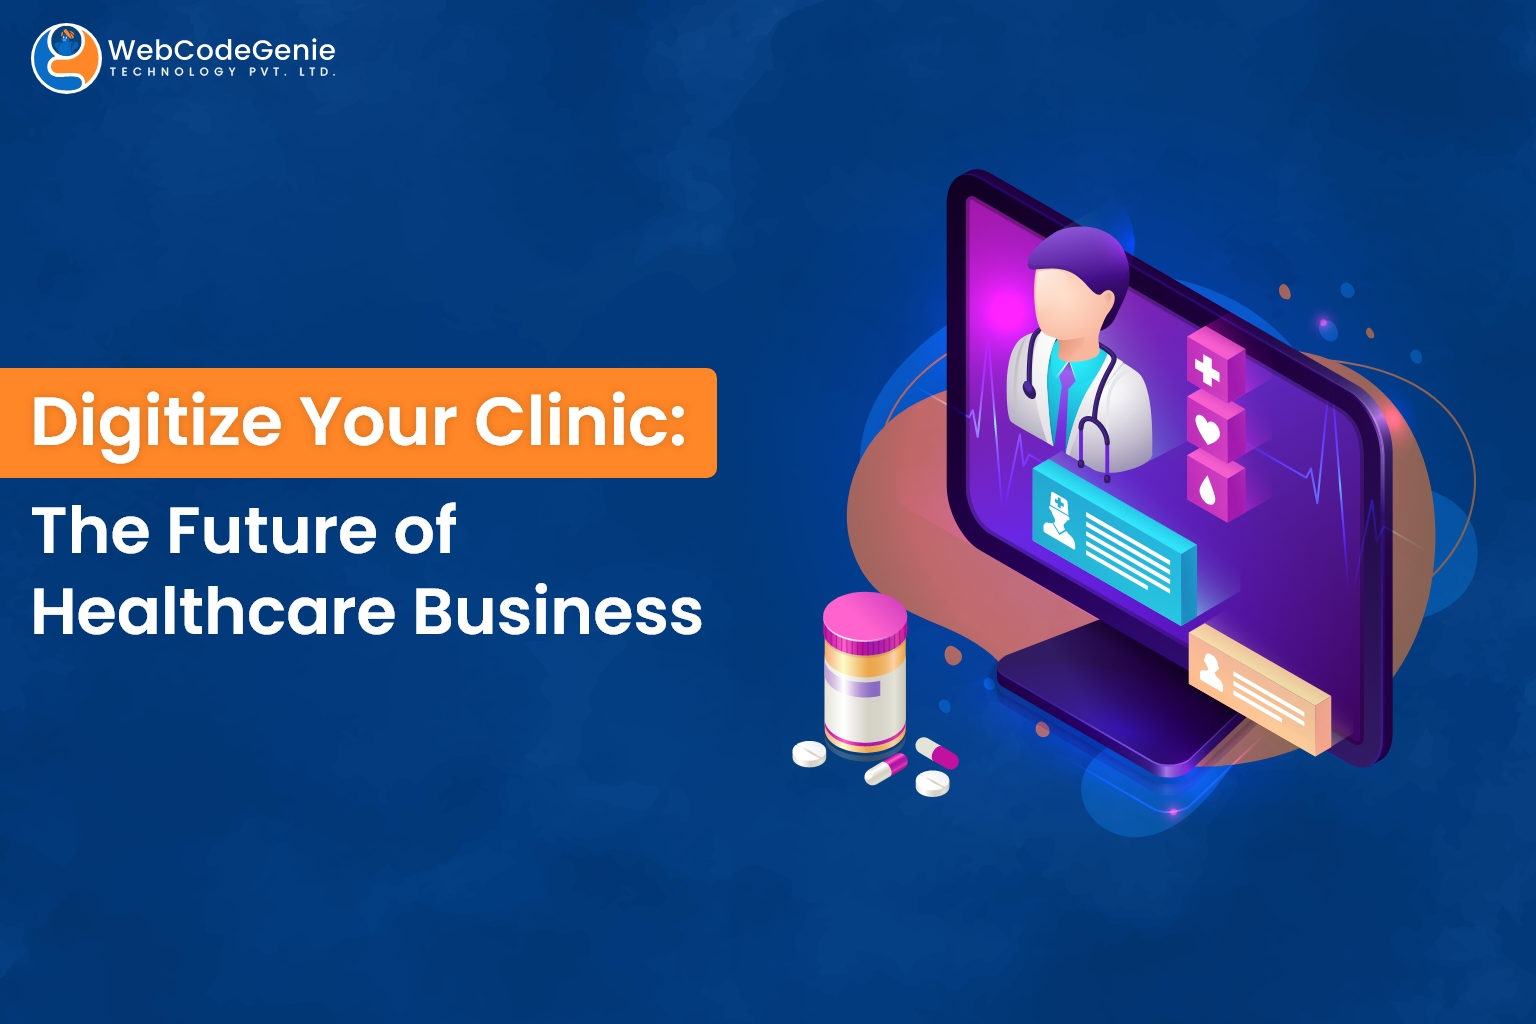 digitize your clinic, the future of healthcare business